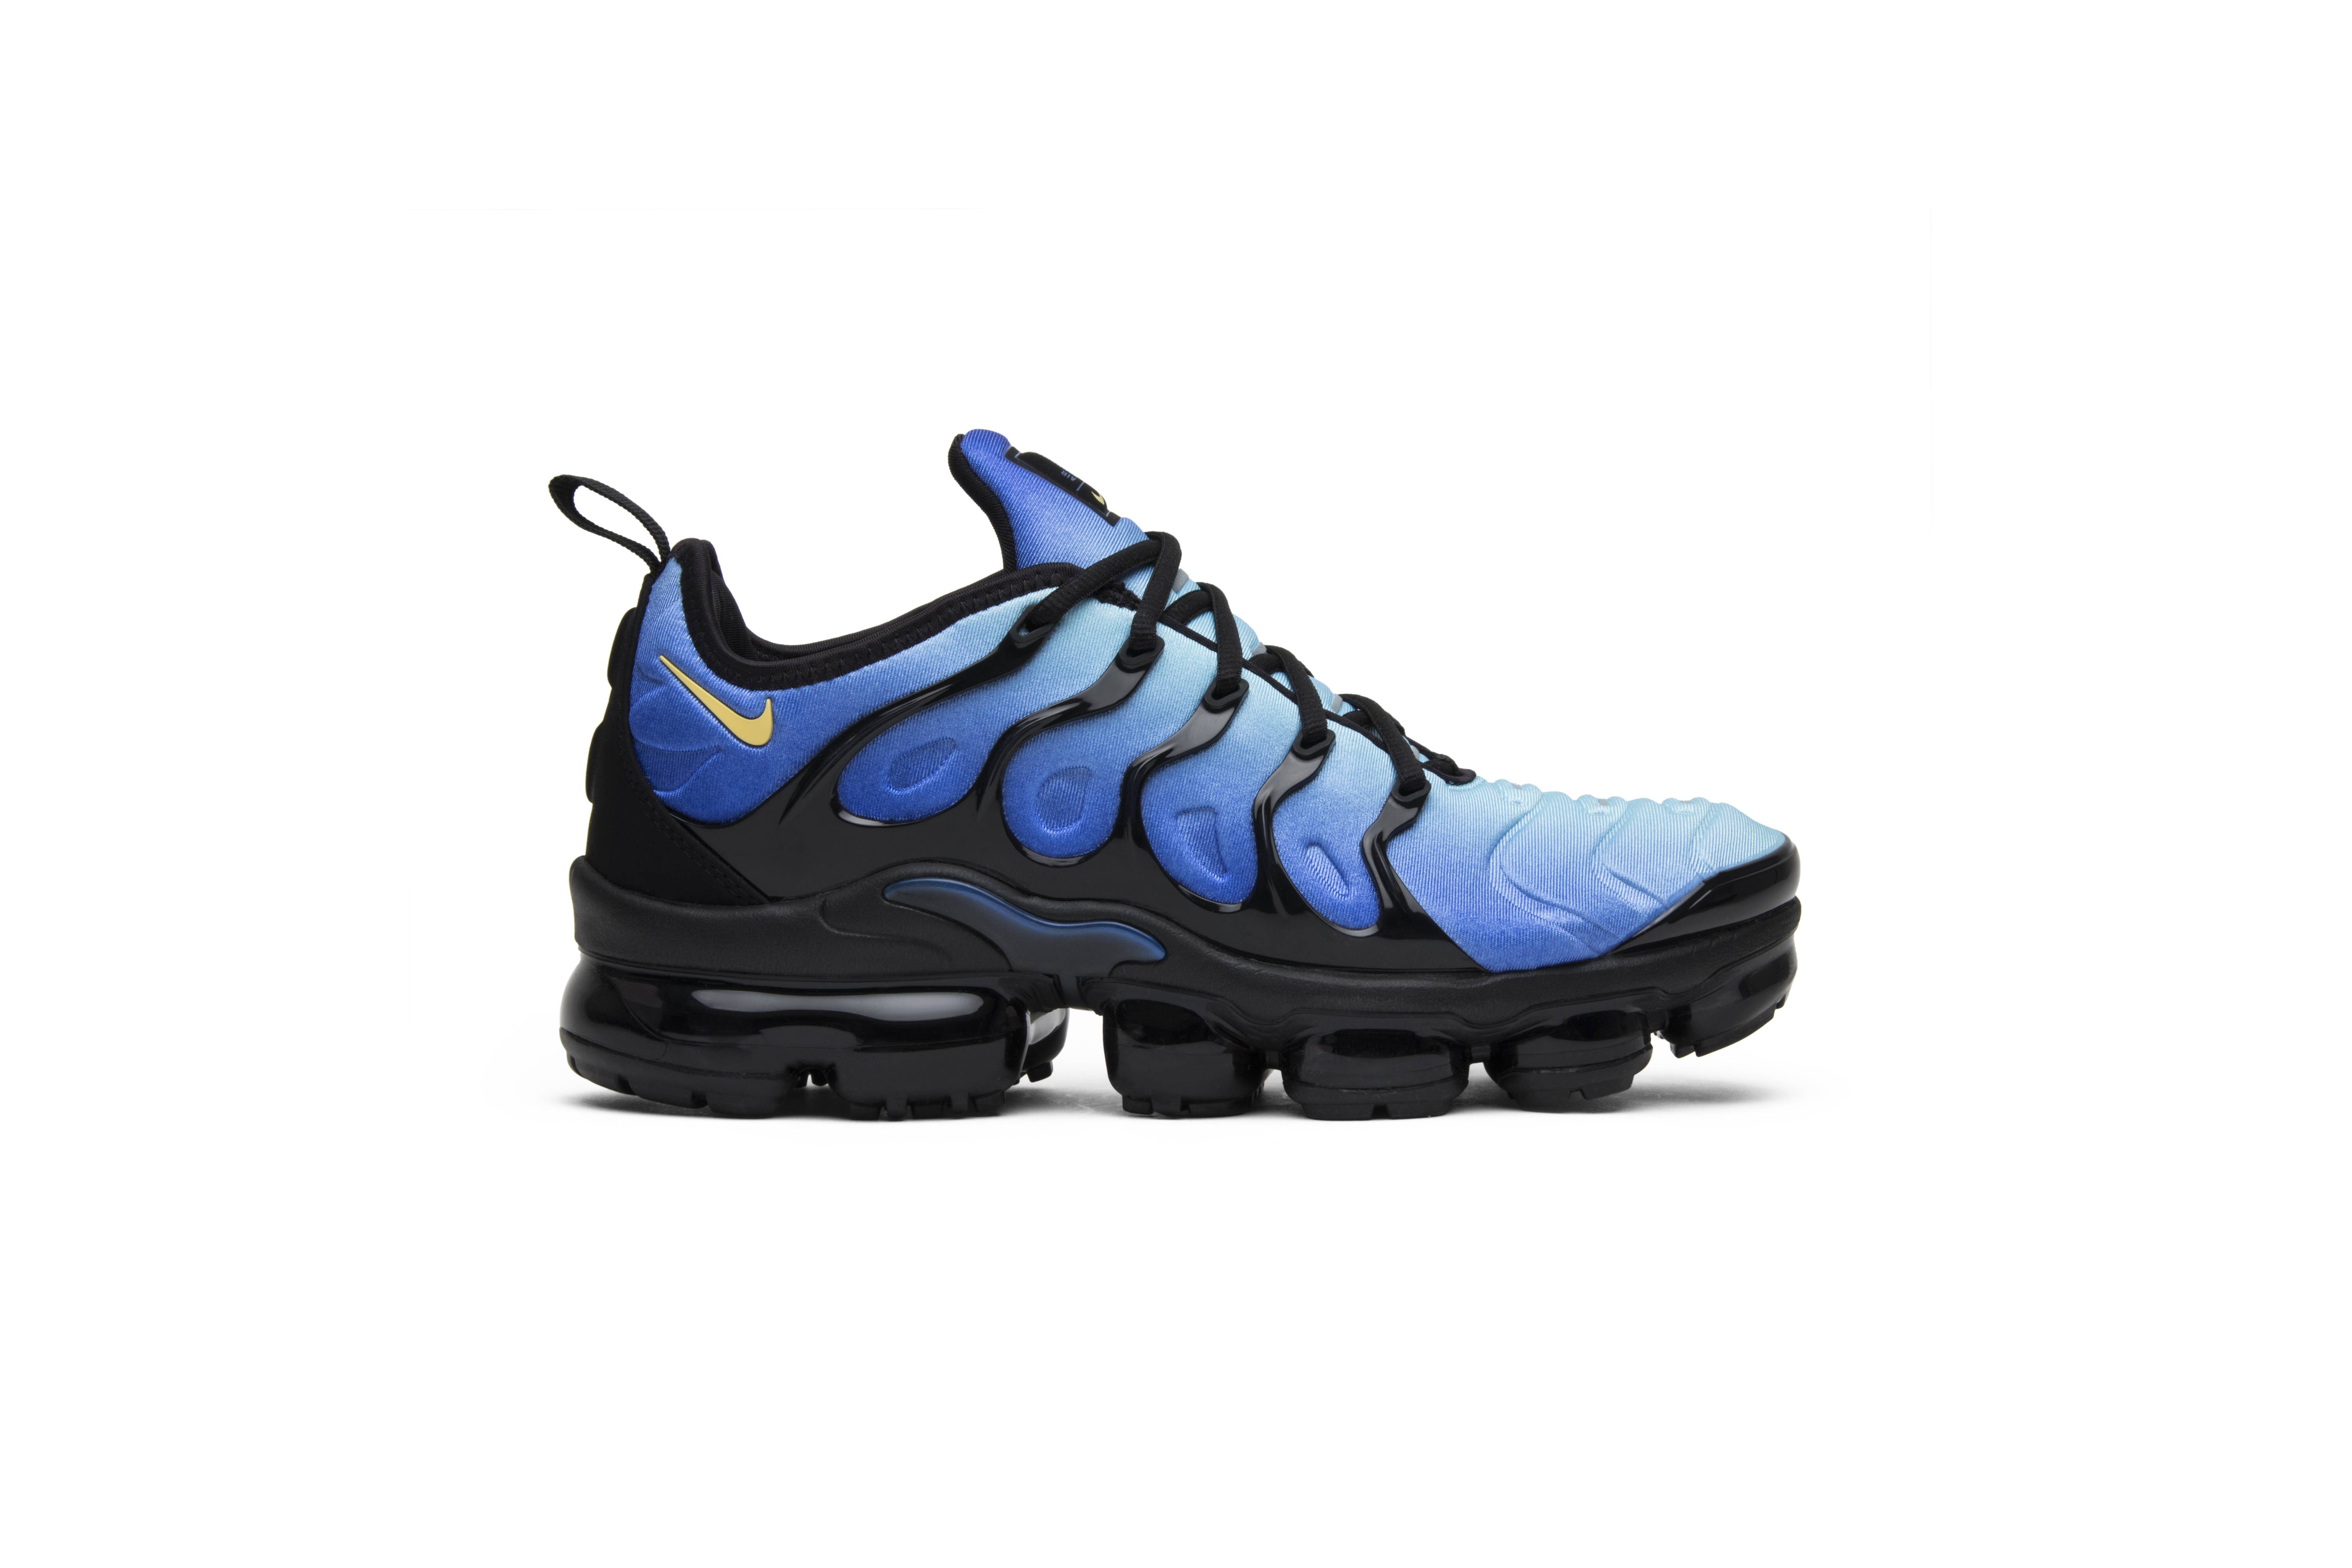 vapormax plus blue and yellow